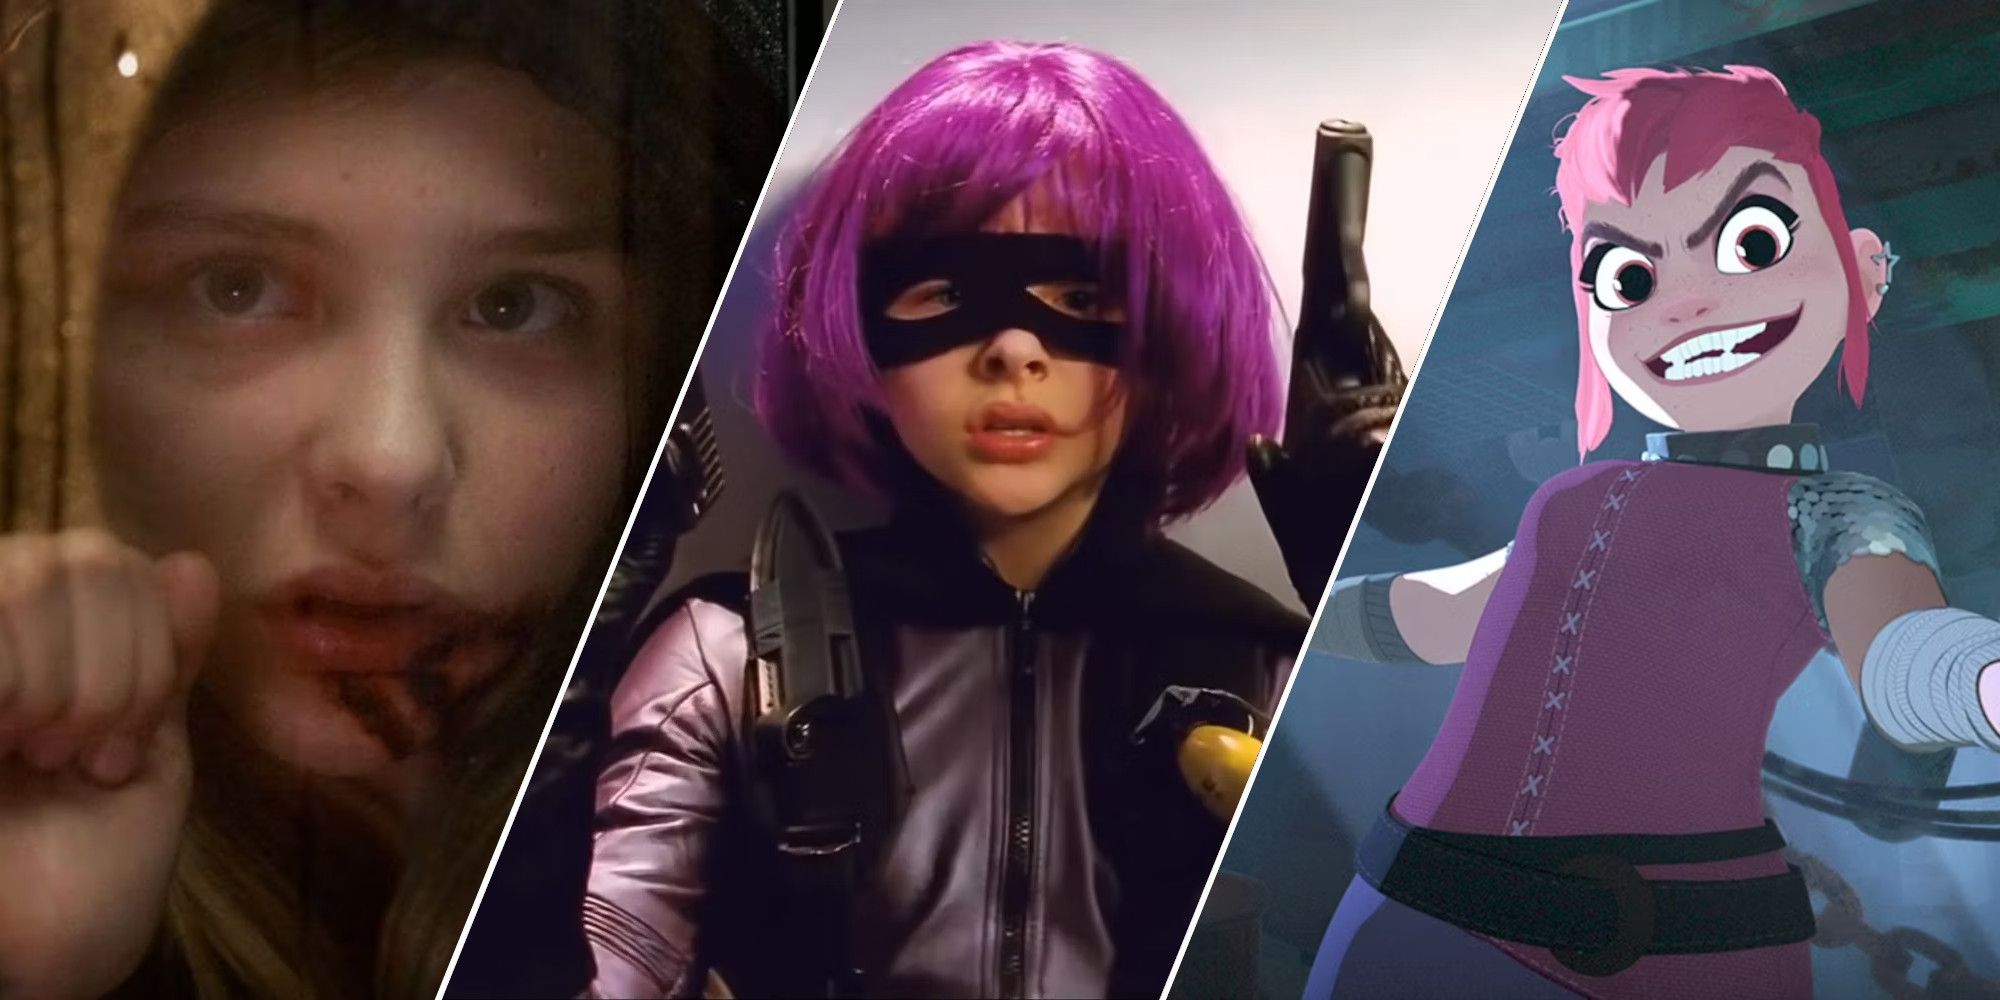 A collage of performances from actress Chloe Grace Moretz, featuring her roles in Let Me In, Kick-Ass, and Nimona